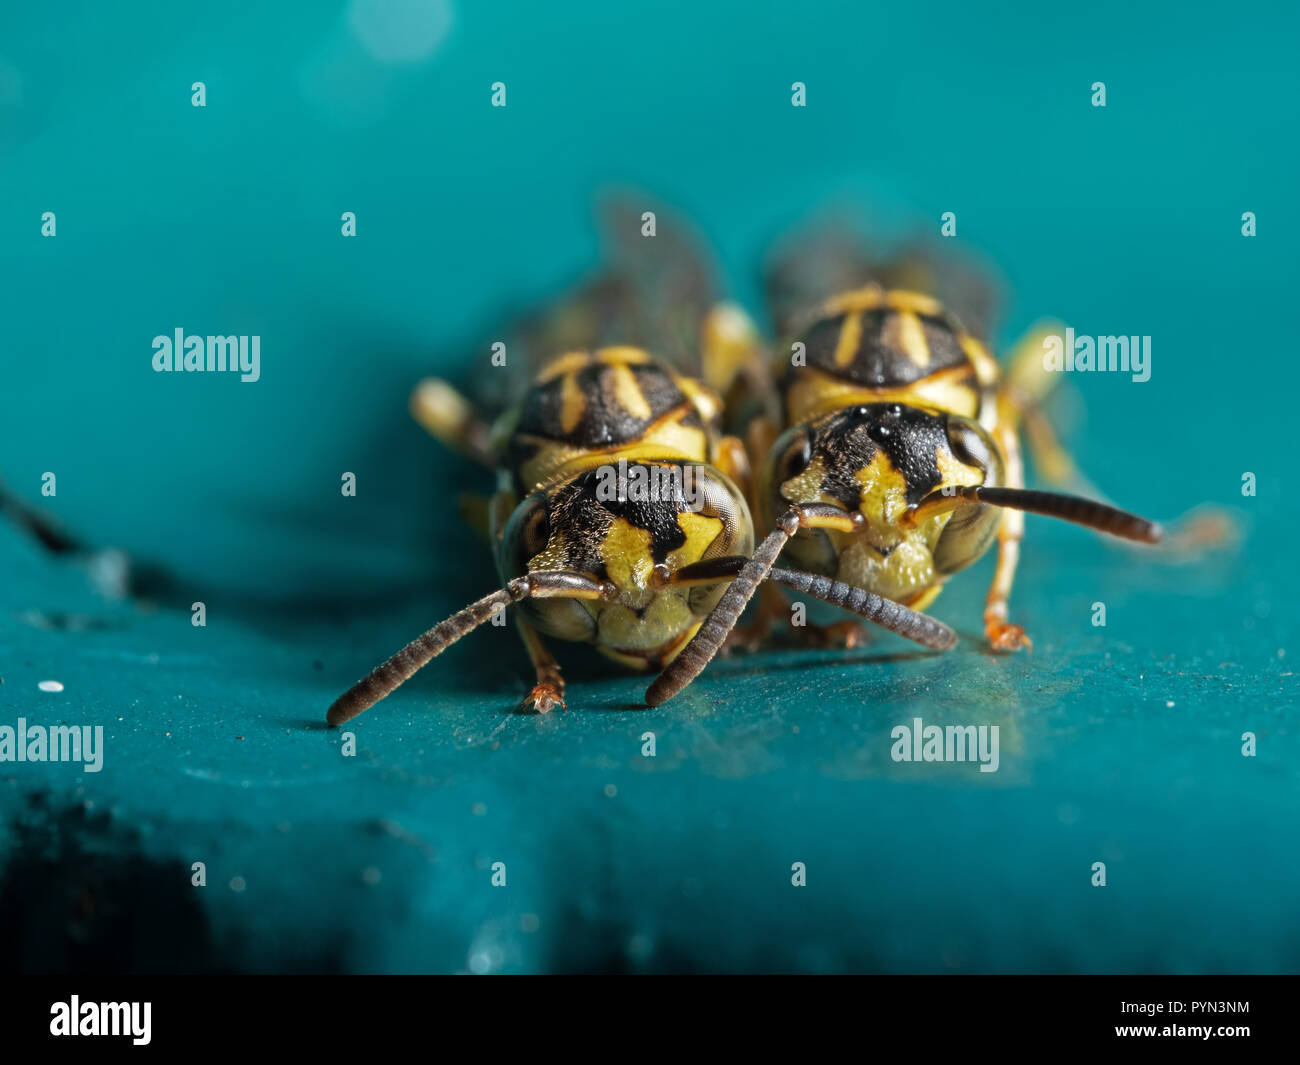 Macro Photography of Two Wasps on Blue Green Metal Material Stock Photo